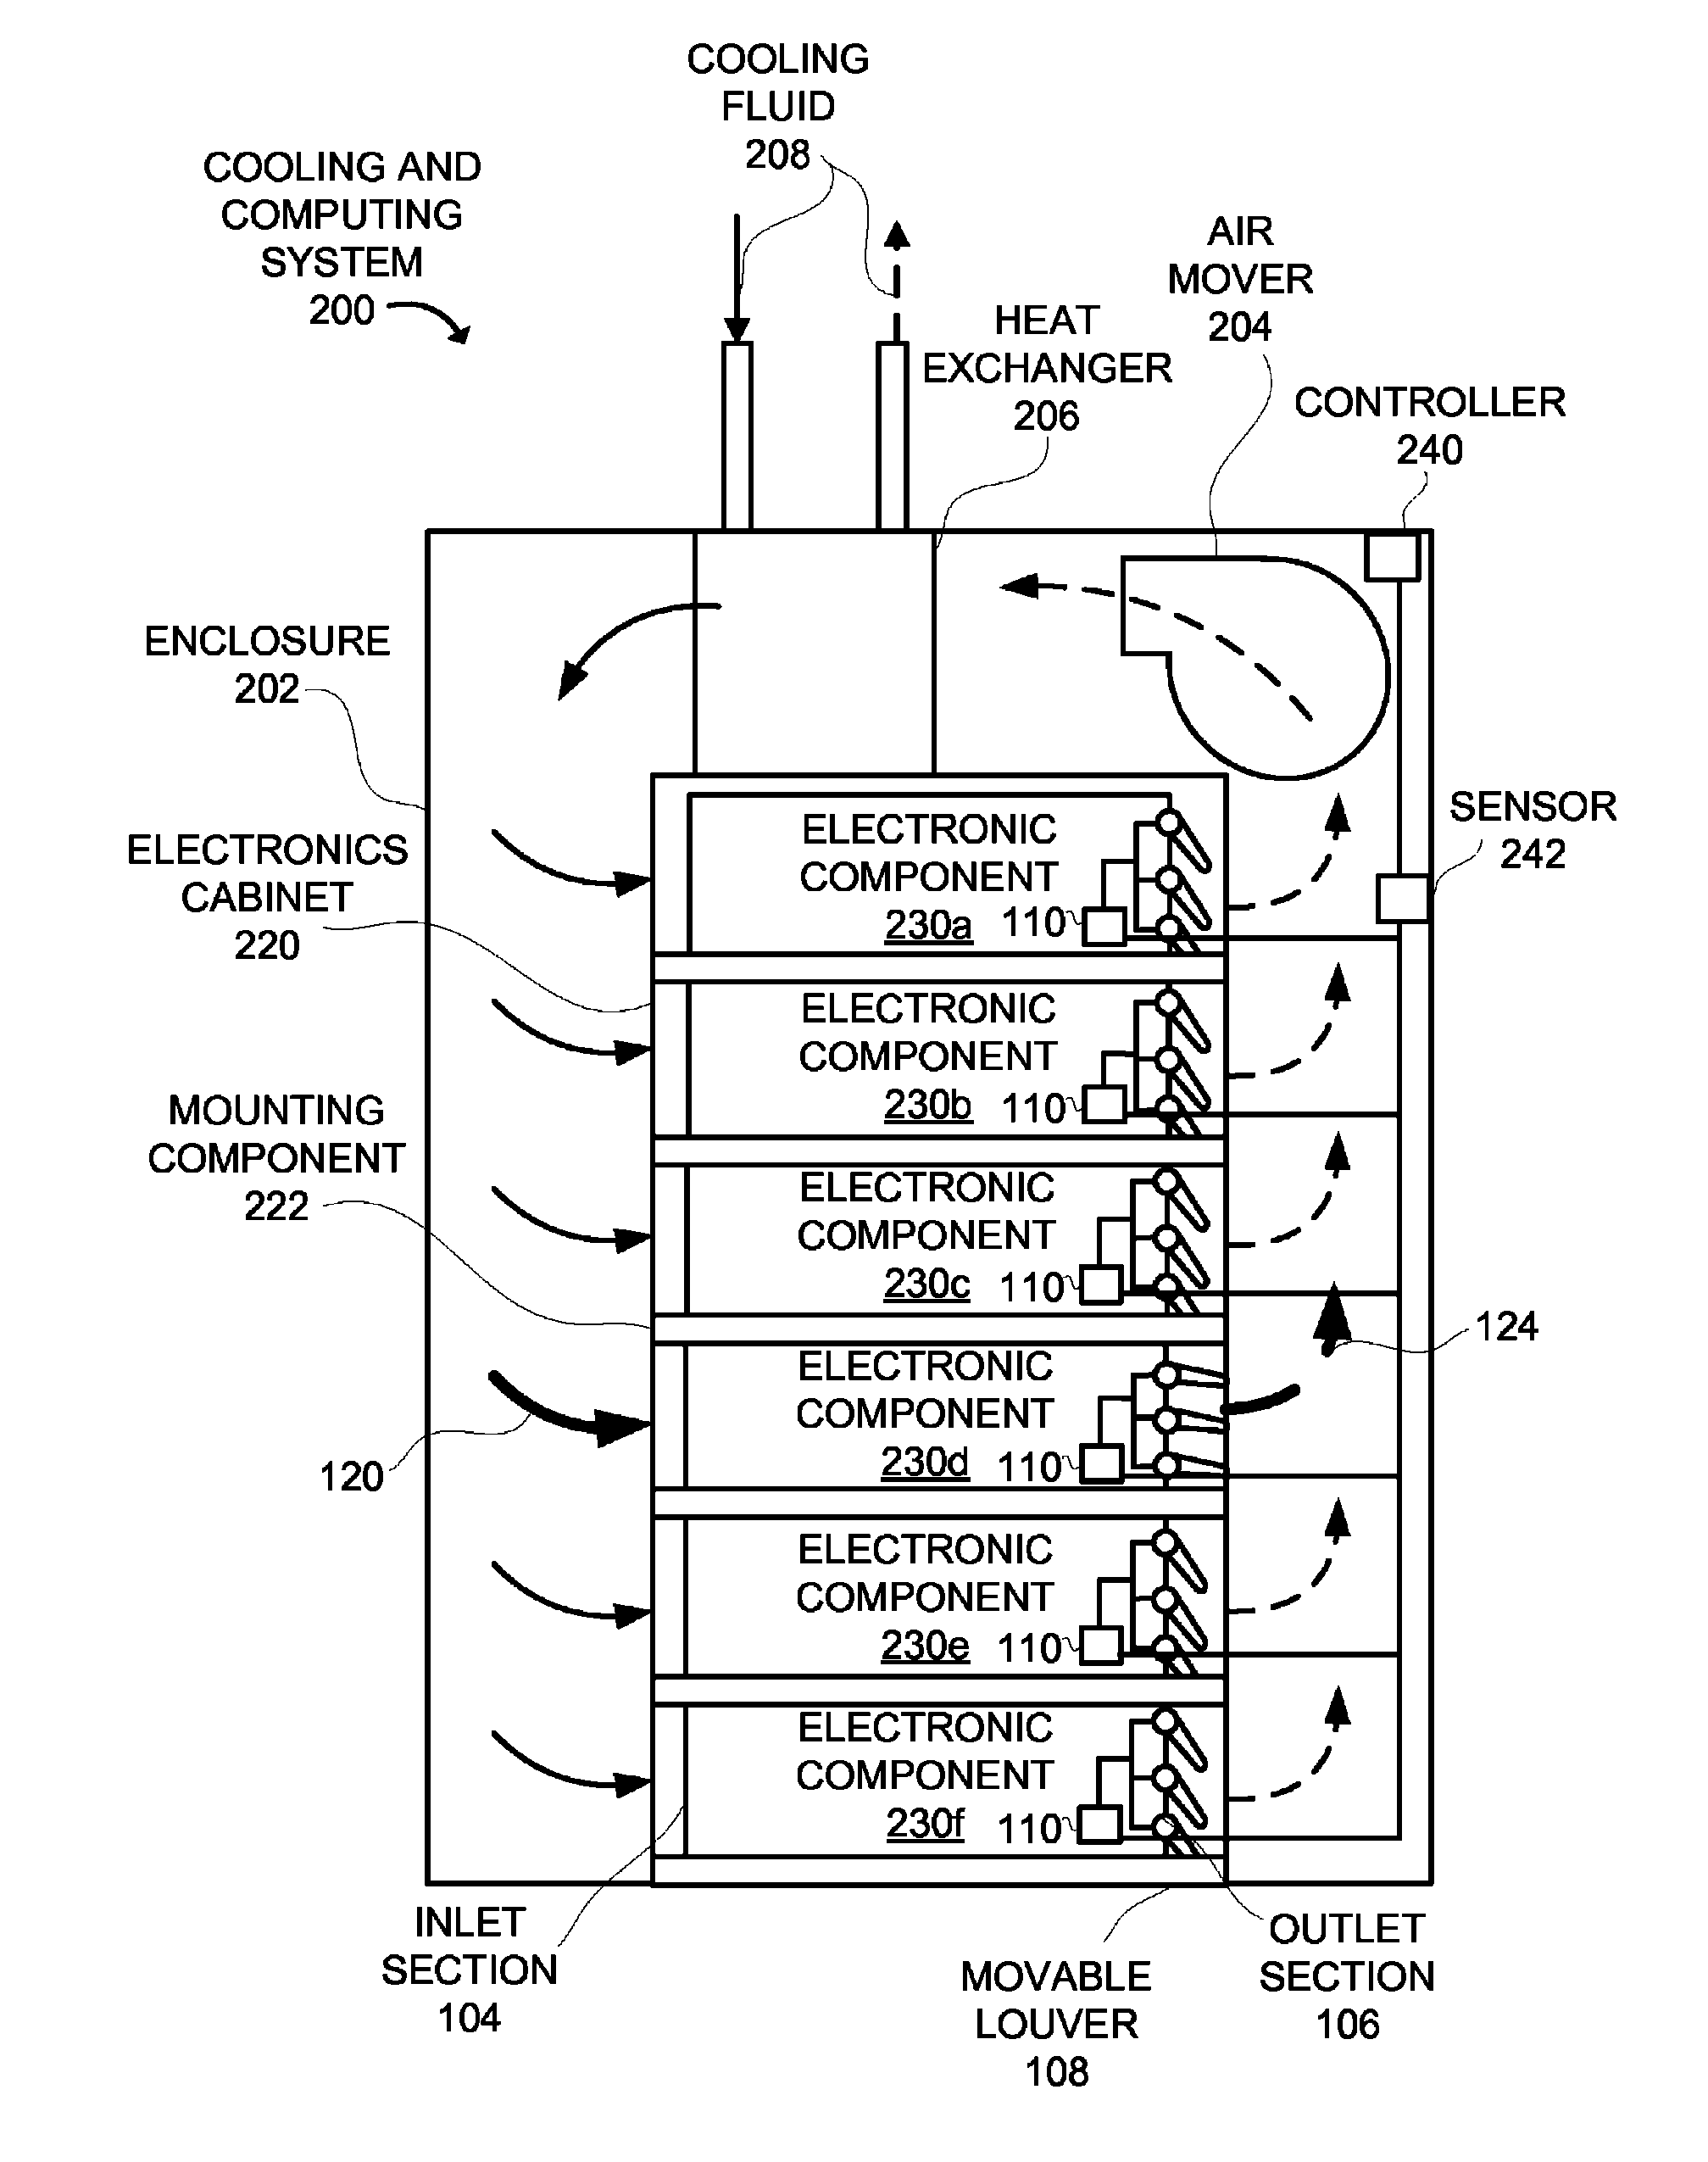 Electronic component having a movable louver